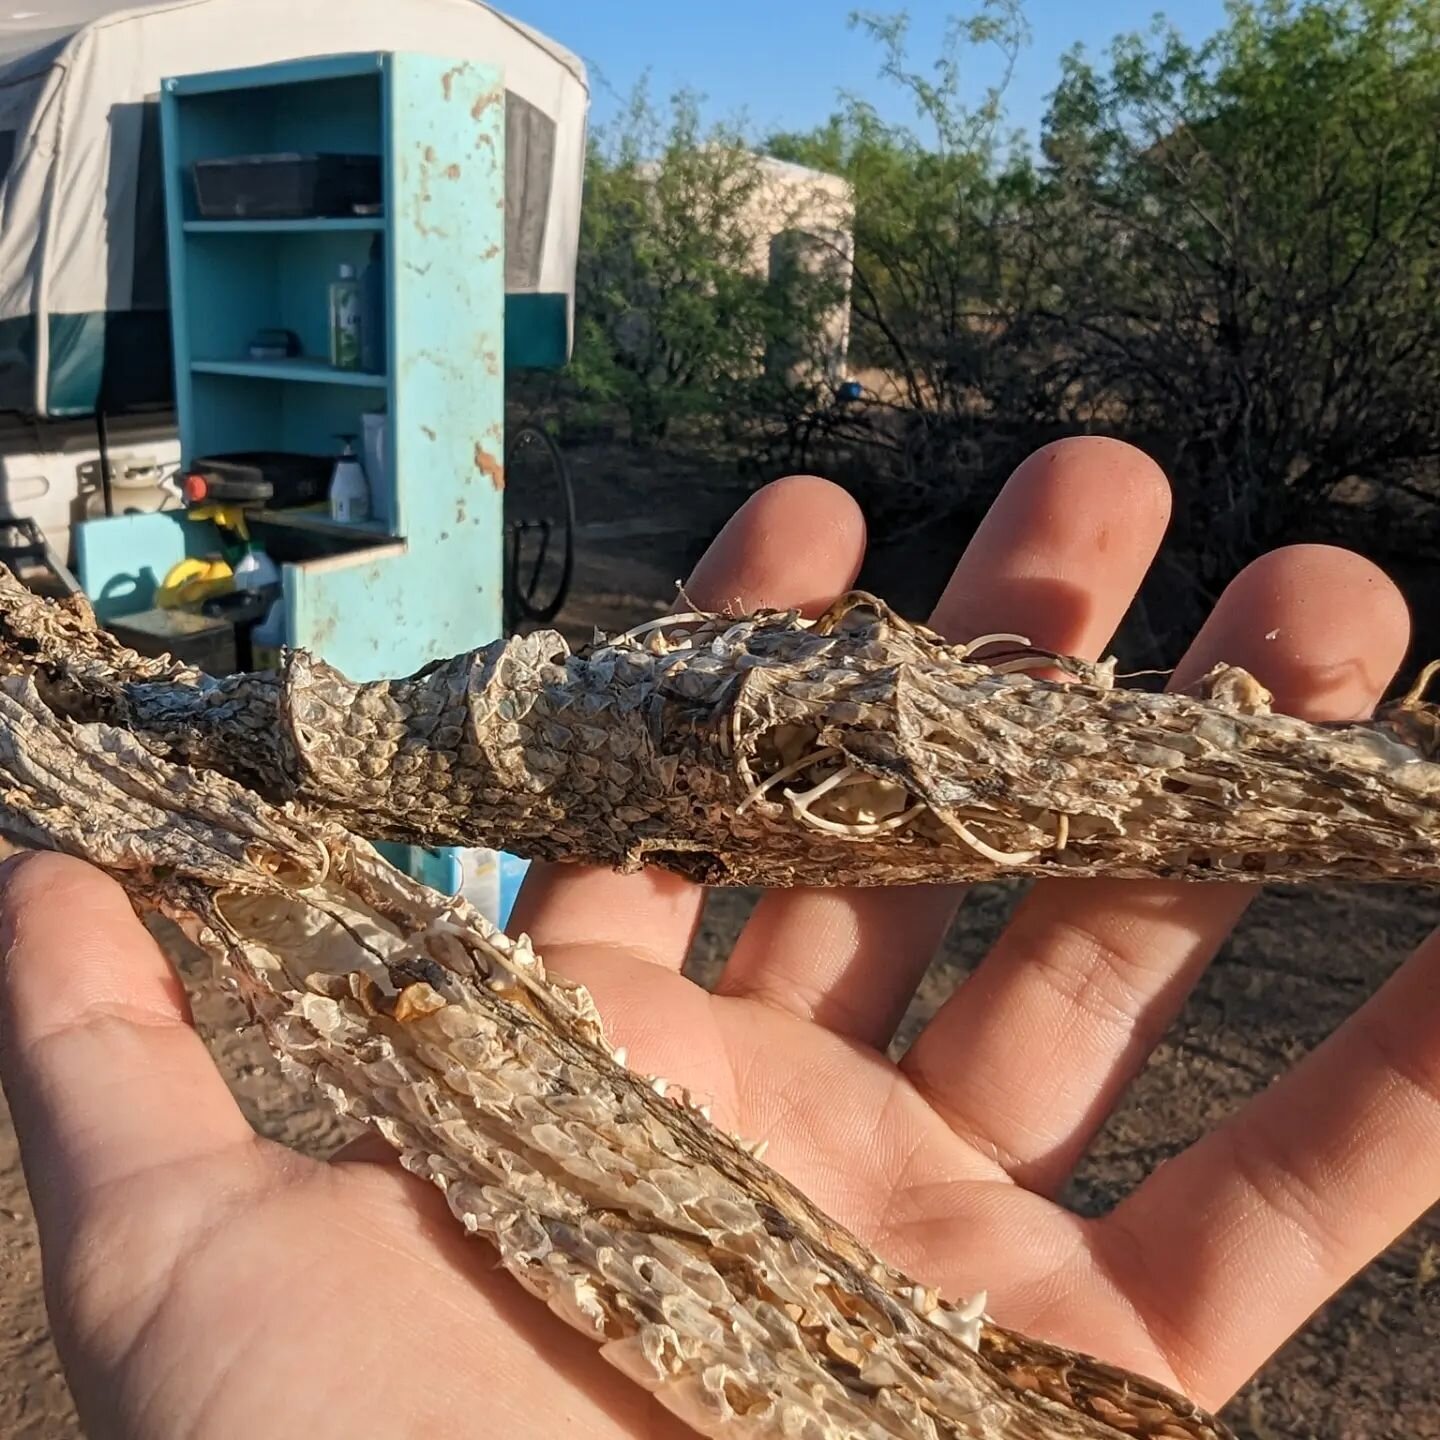 I know you had to have wondered to yourself at least once, &quot;what does an old and dried up rattlesnake look like?&quot; Well, friend, look no further because I have one, and I'd love to show you. 

I am spending some time in the outdoor studio (A